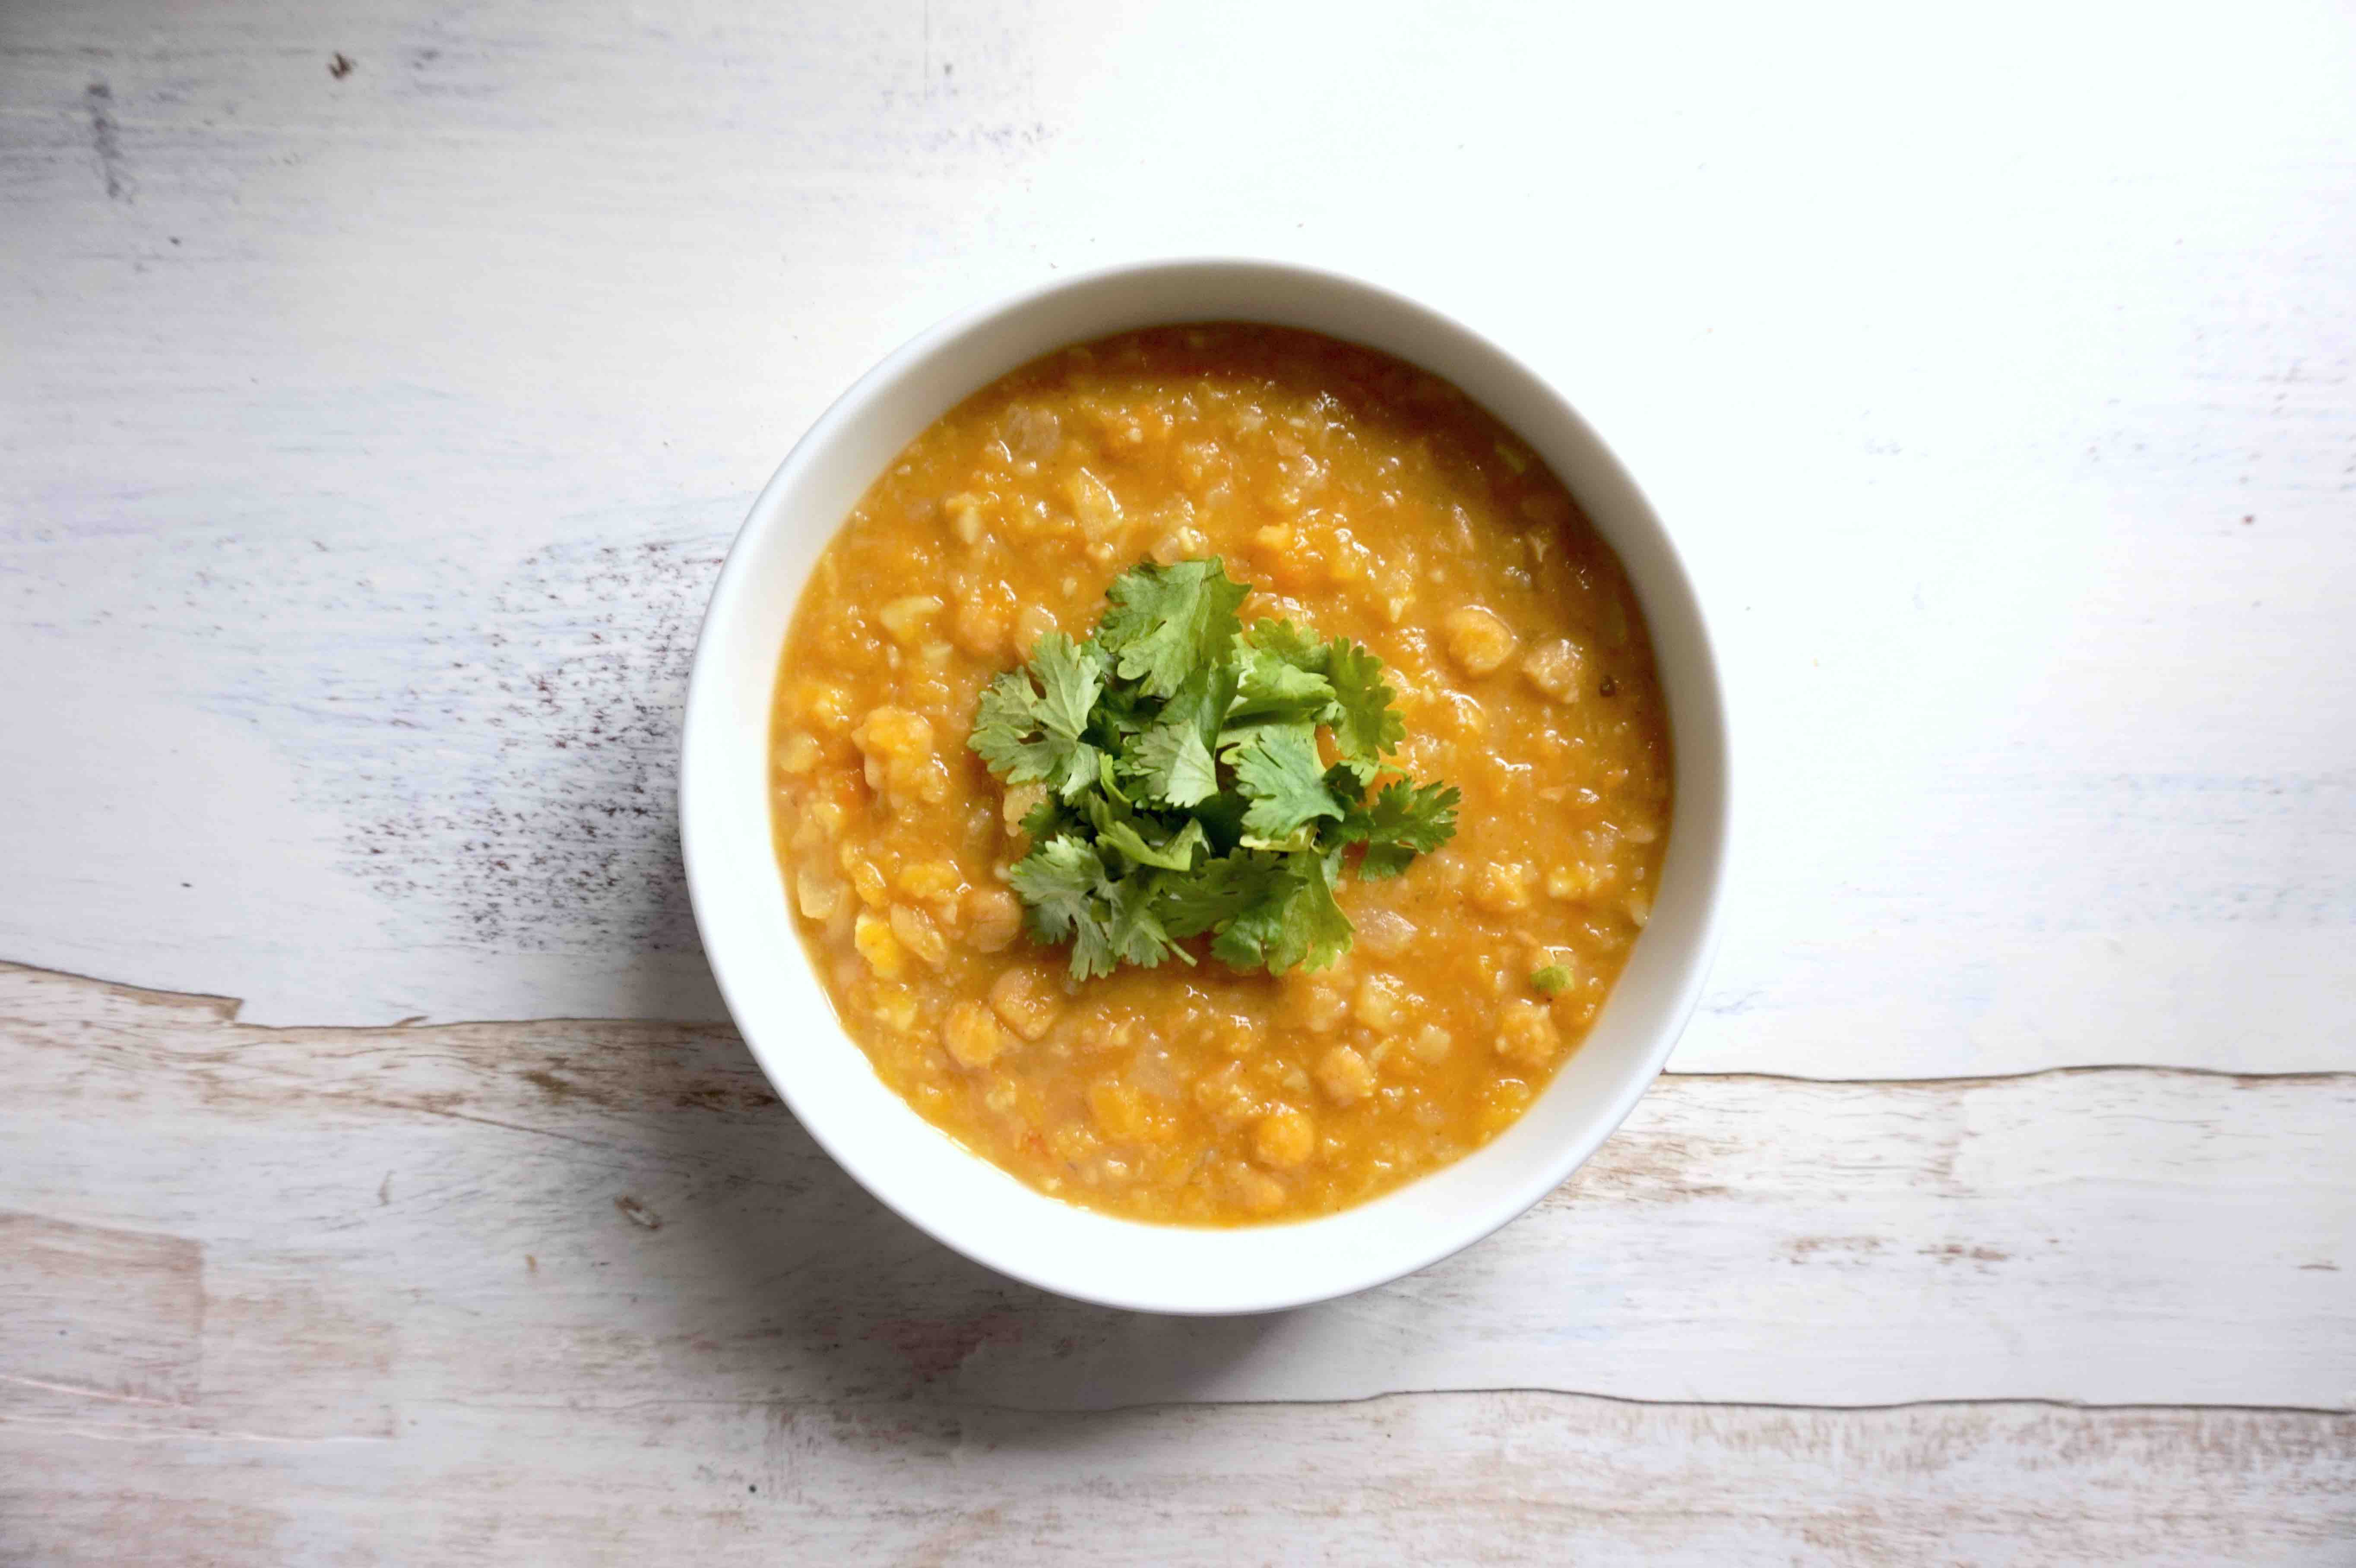 Spicy Vegan Butternut and Chickpea Soup